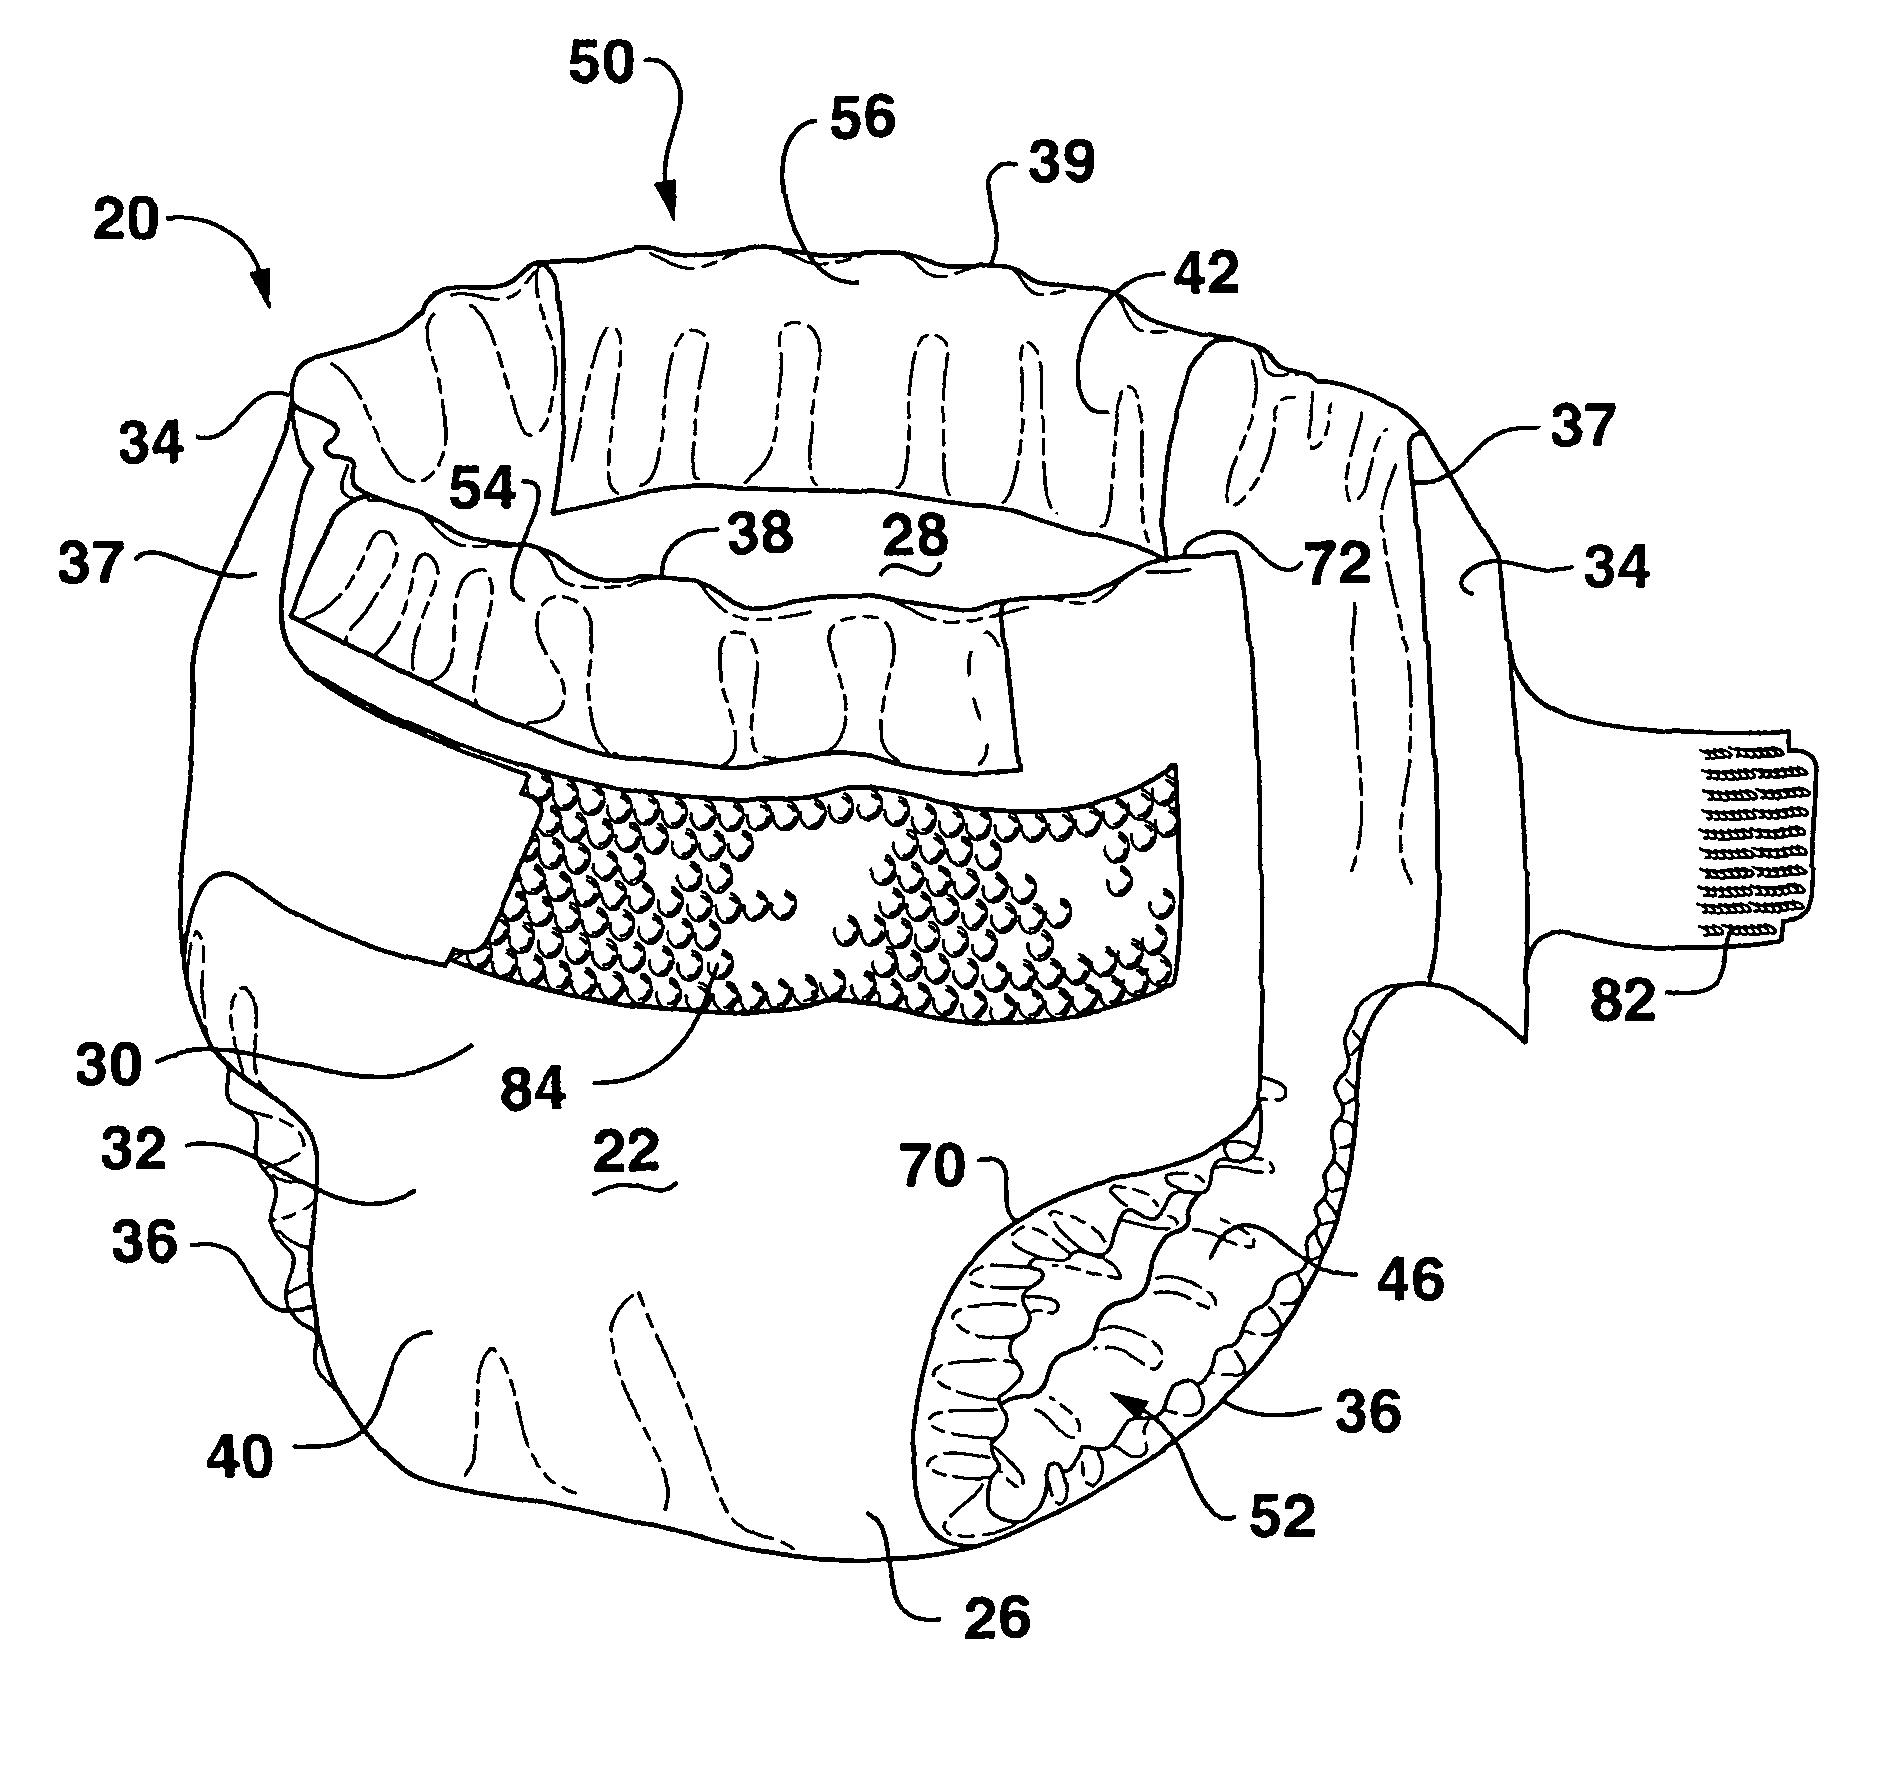 Absorbent articles having a waist region and corresponding fasteners that have matching stretch properties